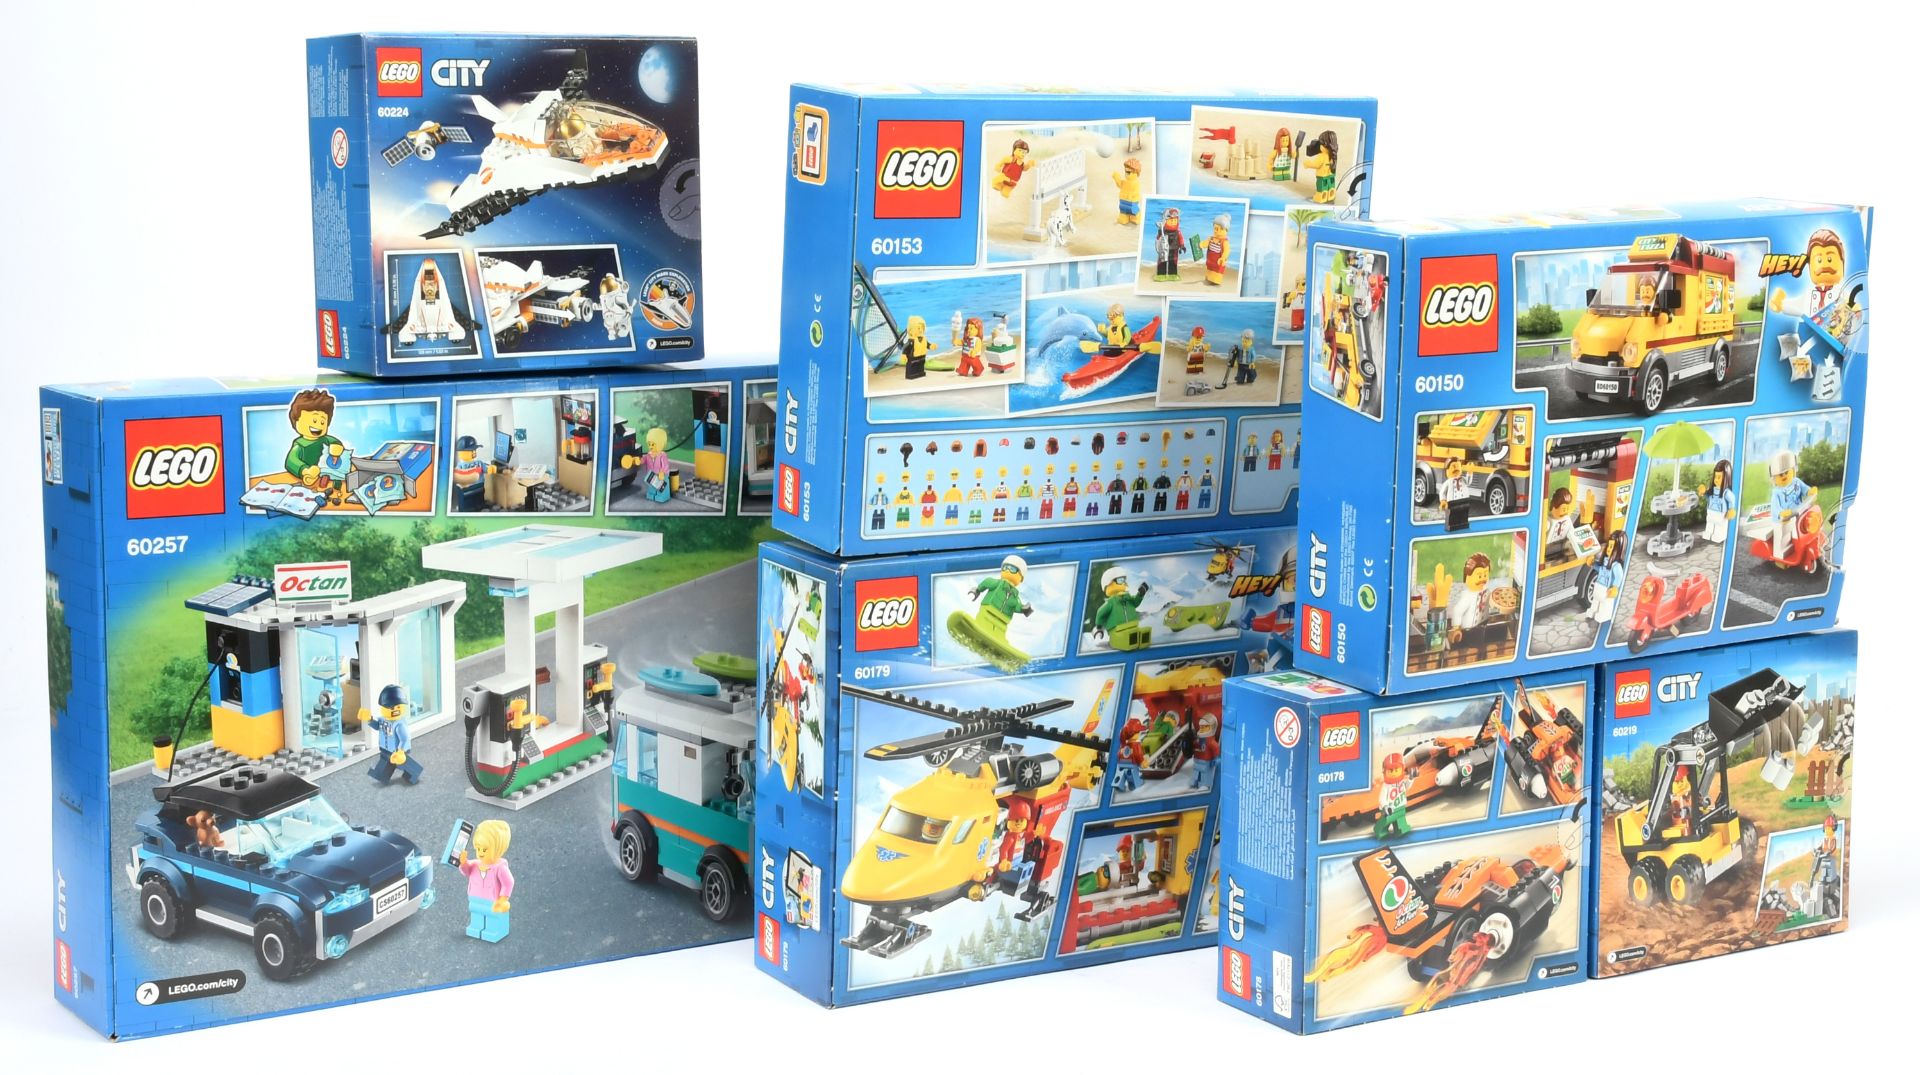 Lego City sets x 7 includes 60150 Pizza Van Takeaway, 60153 Fun at the Beach, 60179 Helicopter Sn... - Bild 2 aus 2